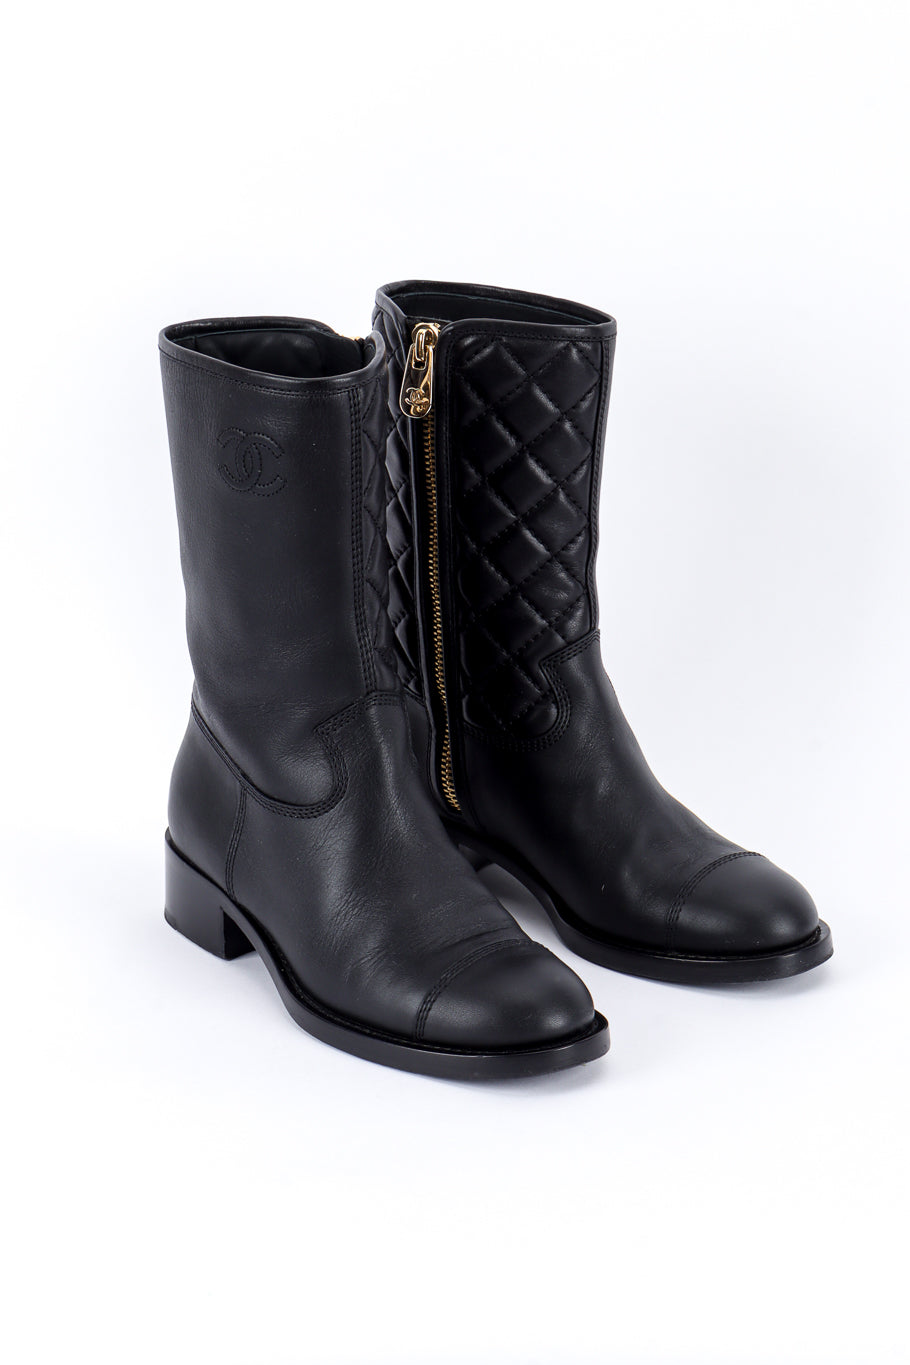 Chanel CC Quilted Mid-Calf Boots 3/4 front @recess la